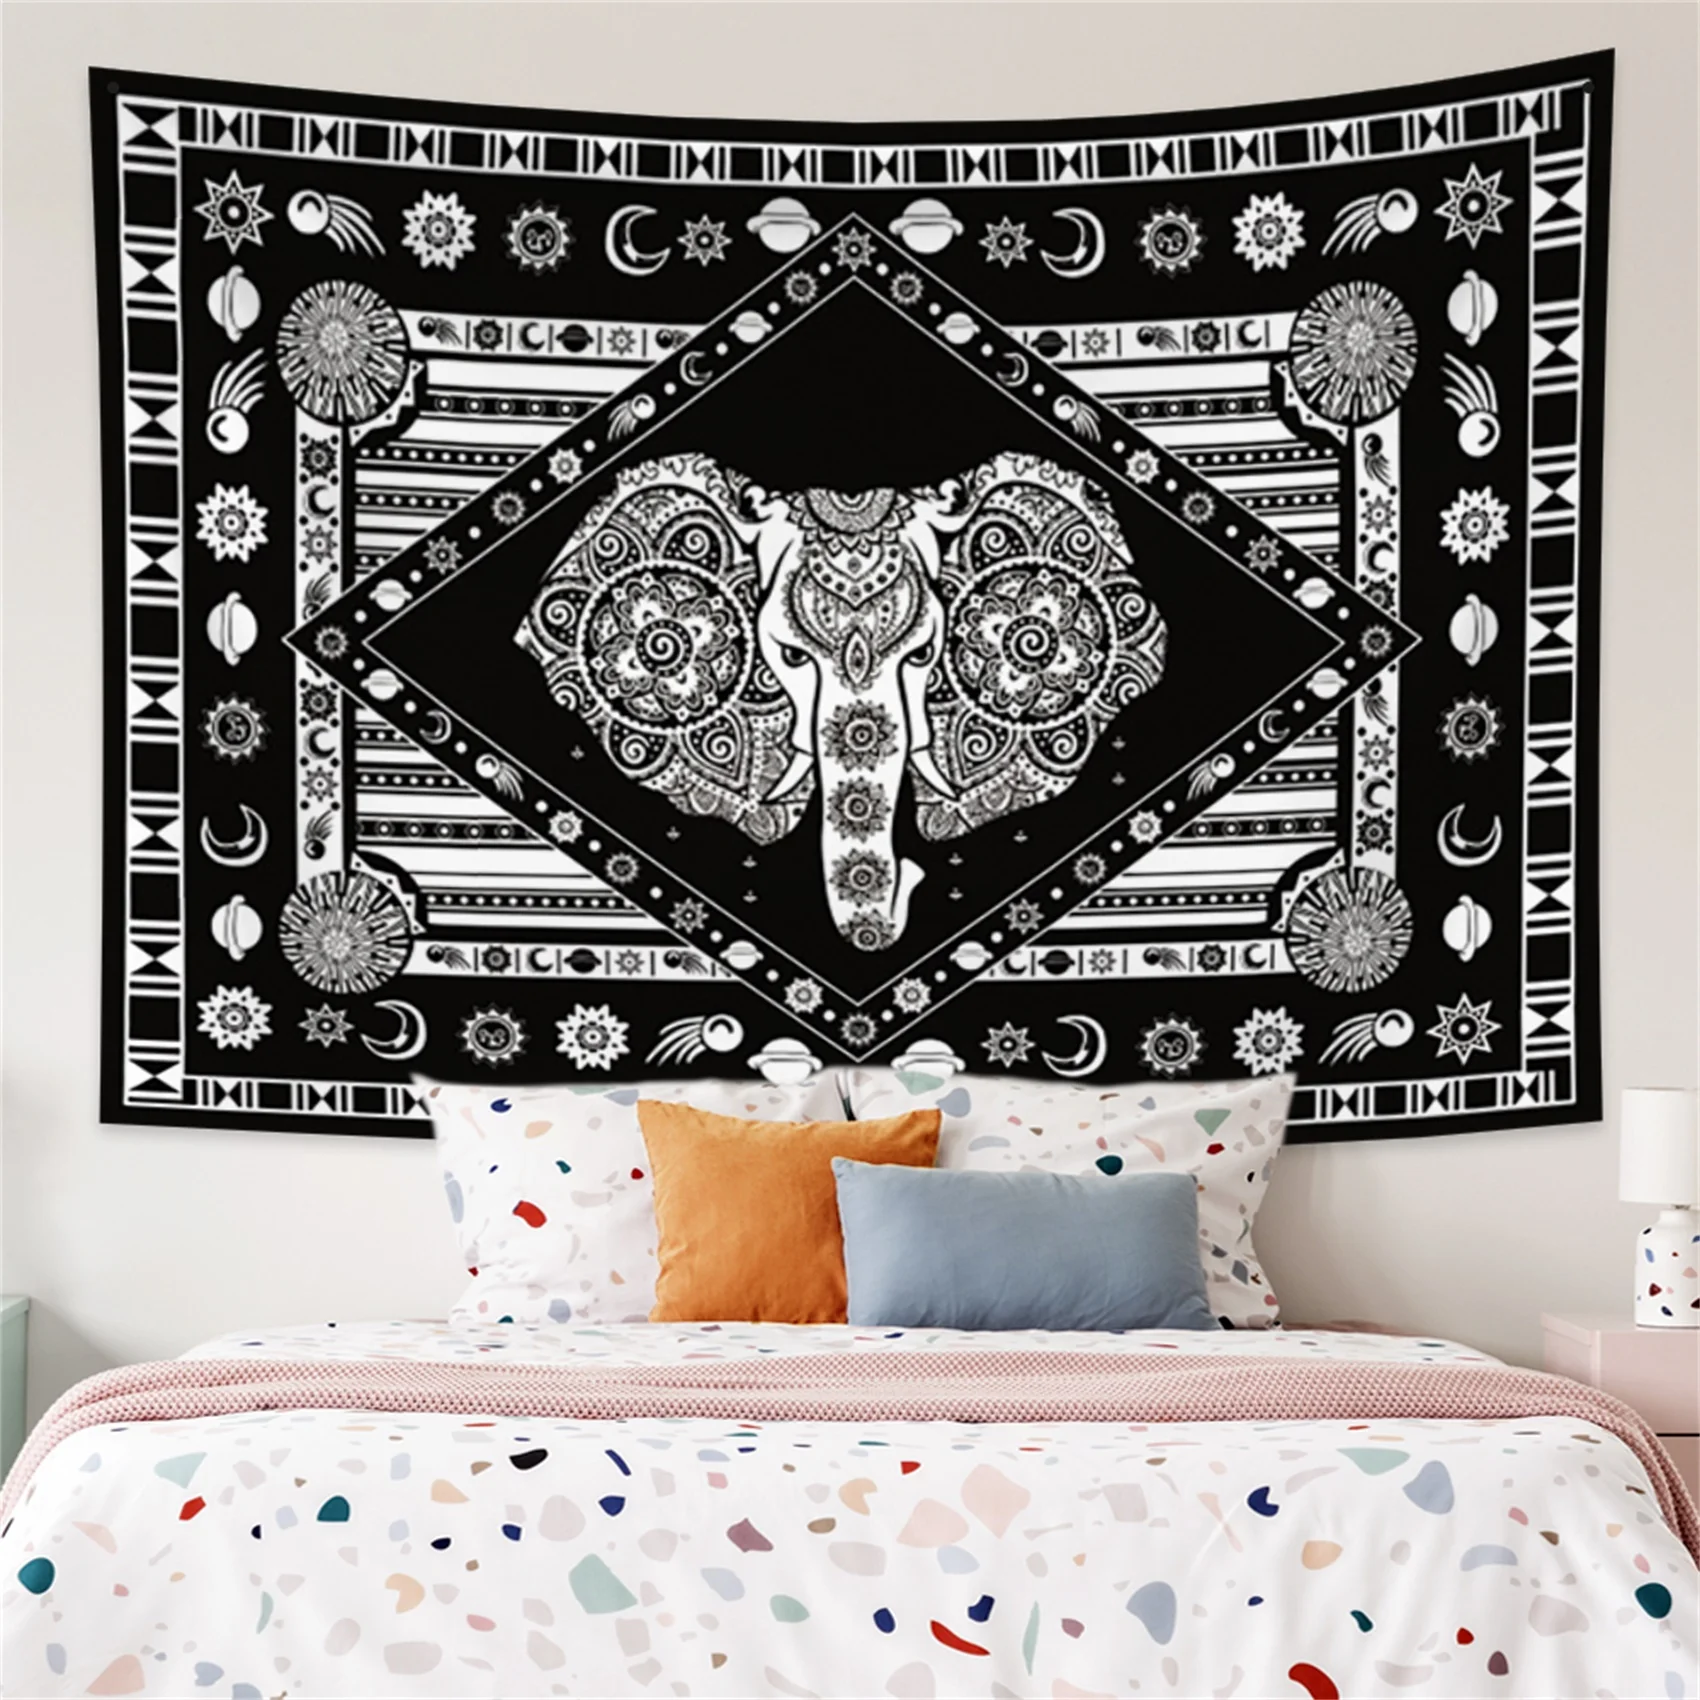 

Indian Elephant Pattern Tapestry Black White Hippie Psychedelic Mandala Bohemian Wall Hanging Decor Room Dorm Bedroom Tapestries